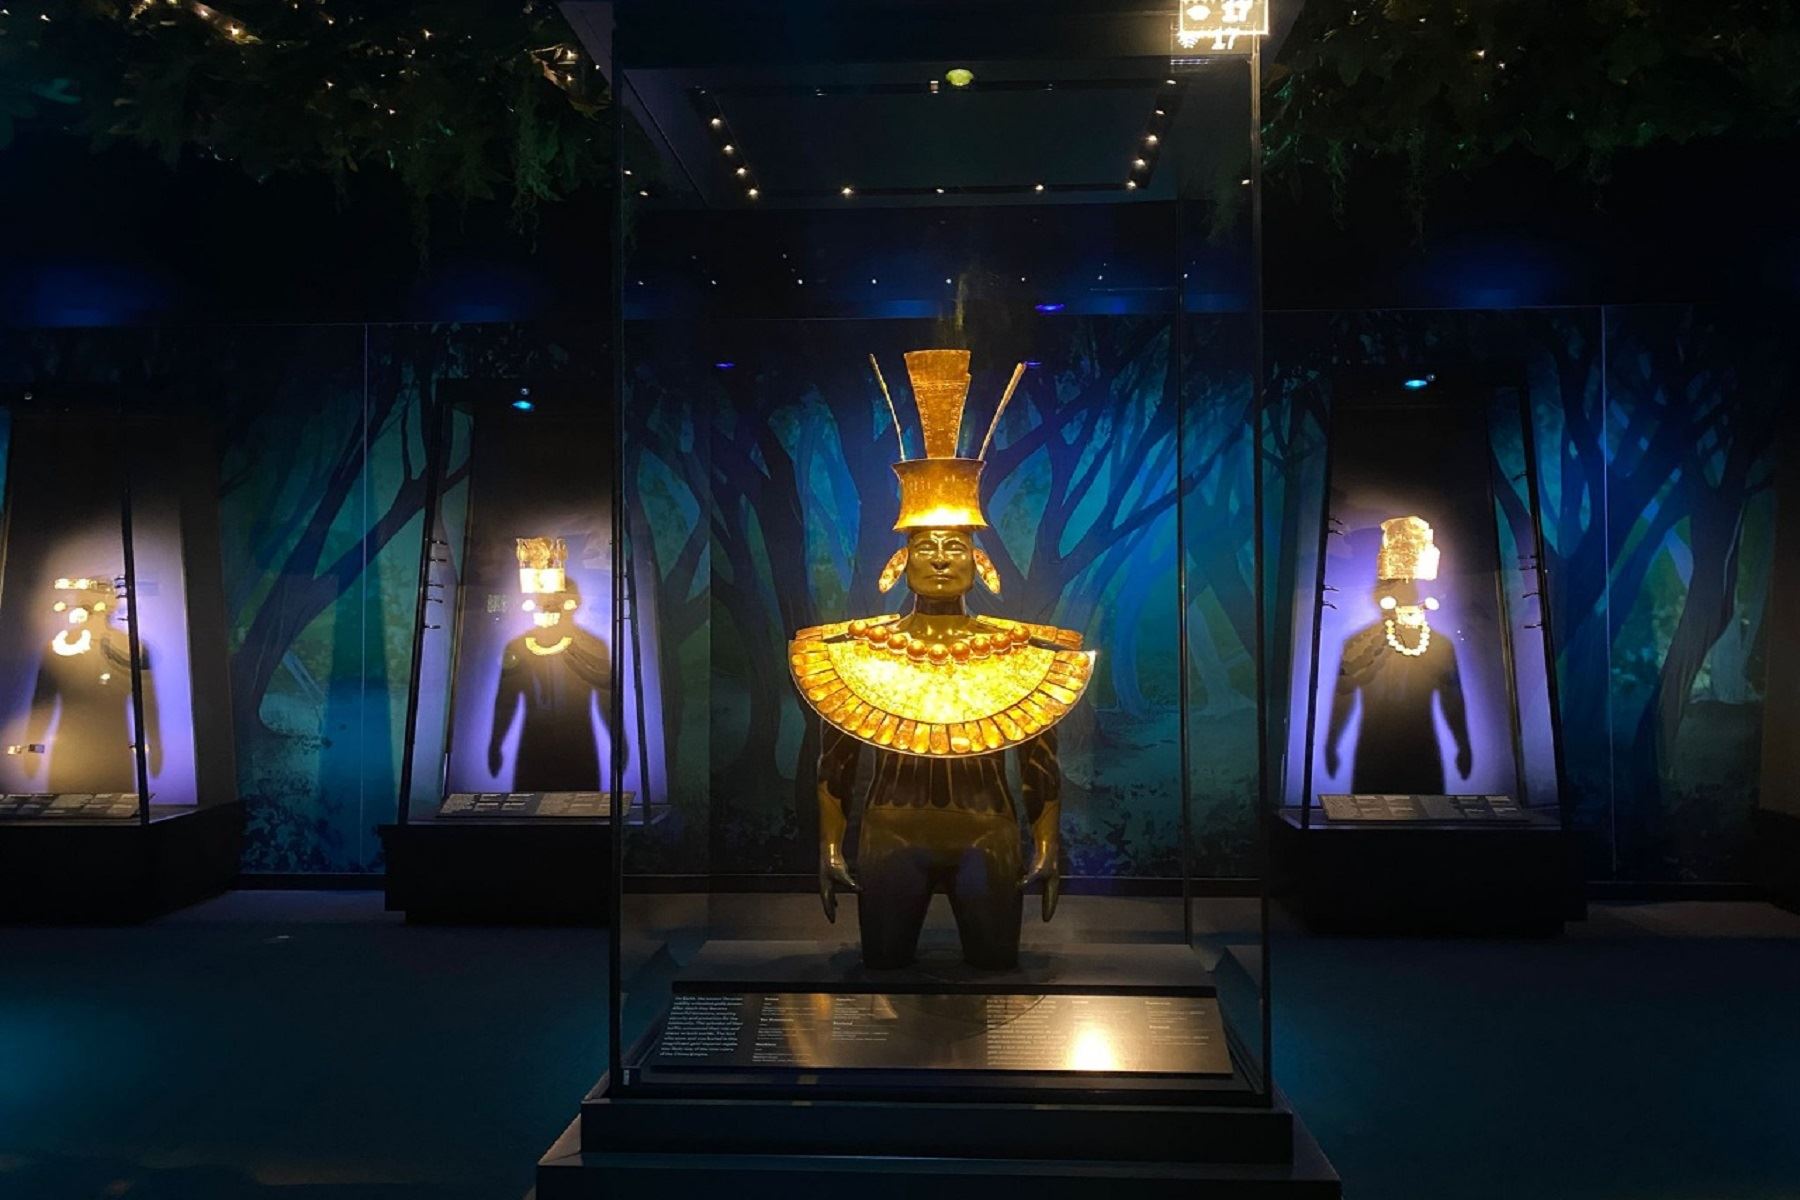 Over 3,000 years of ancient Peruvian civilization is on display in Paris this summer